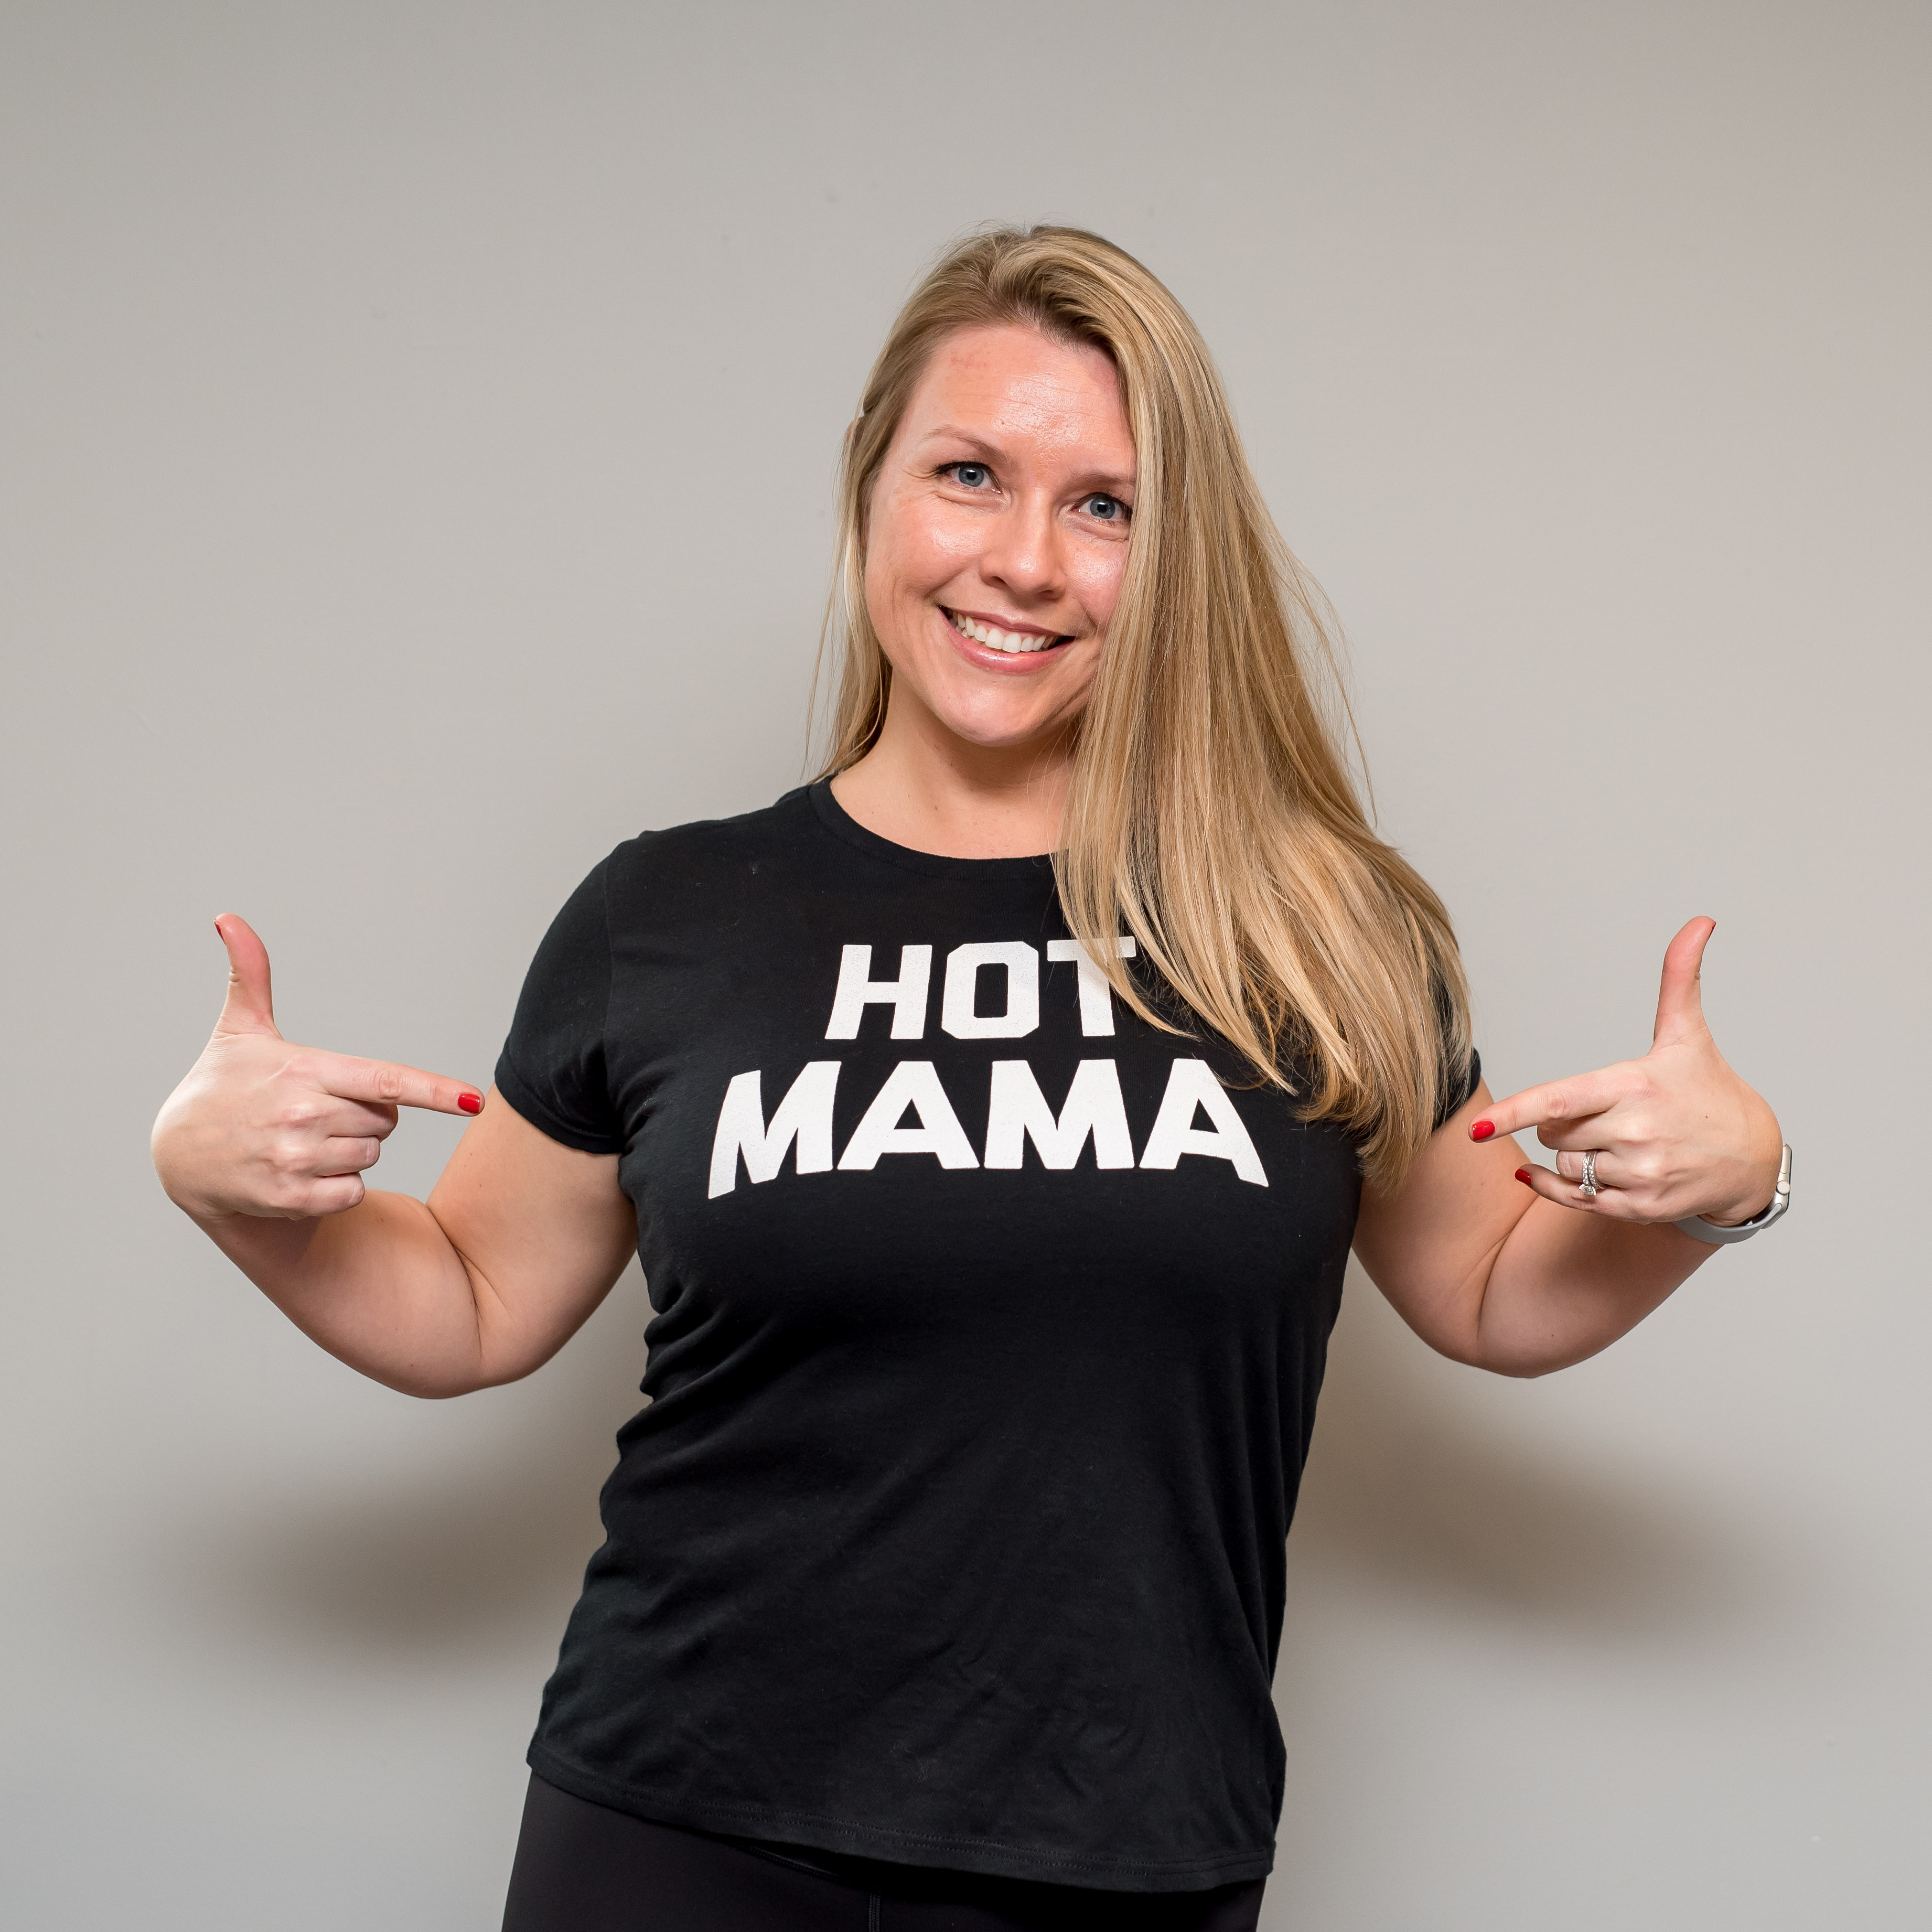 HOT MAMAS Challenge is Heading to Beverly!